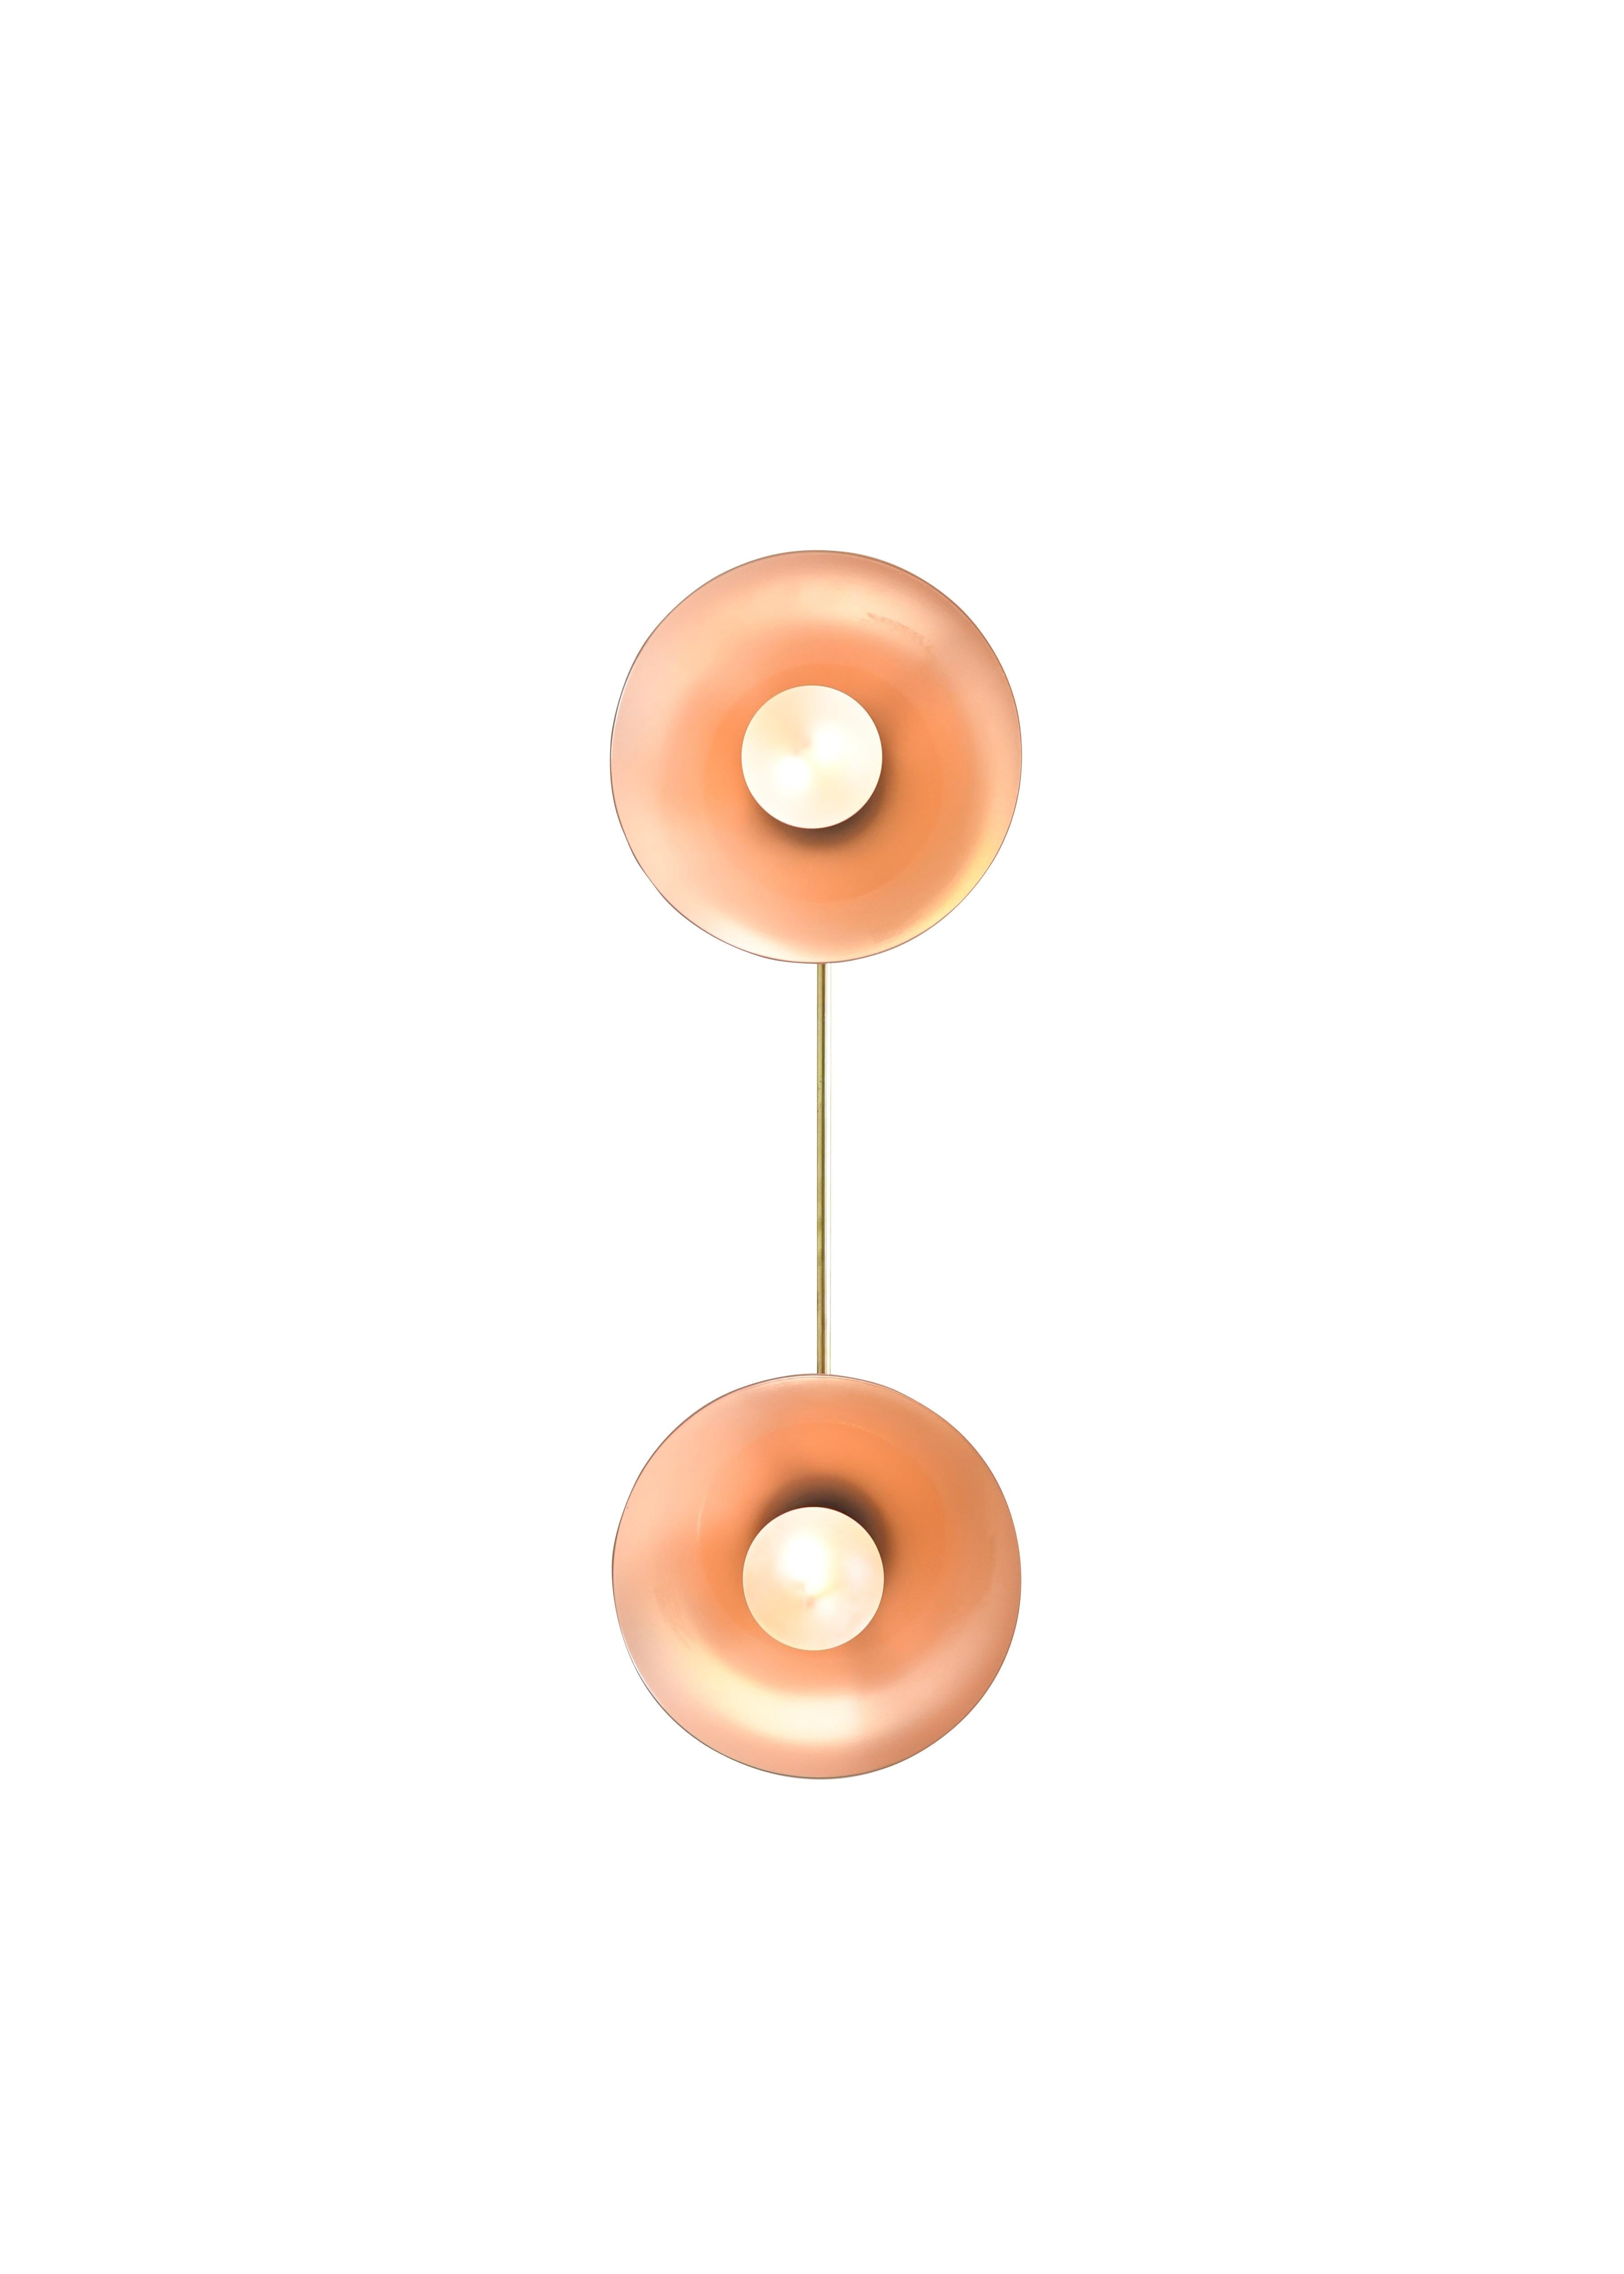 Bi-Focal Wall Light in Brass and Blush Enamel by Blueprint Lighting, 2019 In Excellent Condition For Sale In New York, NY